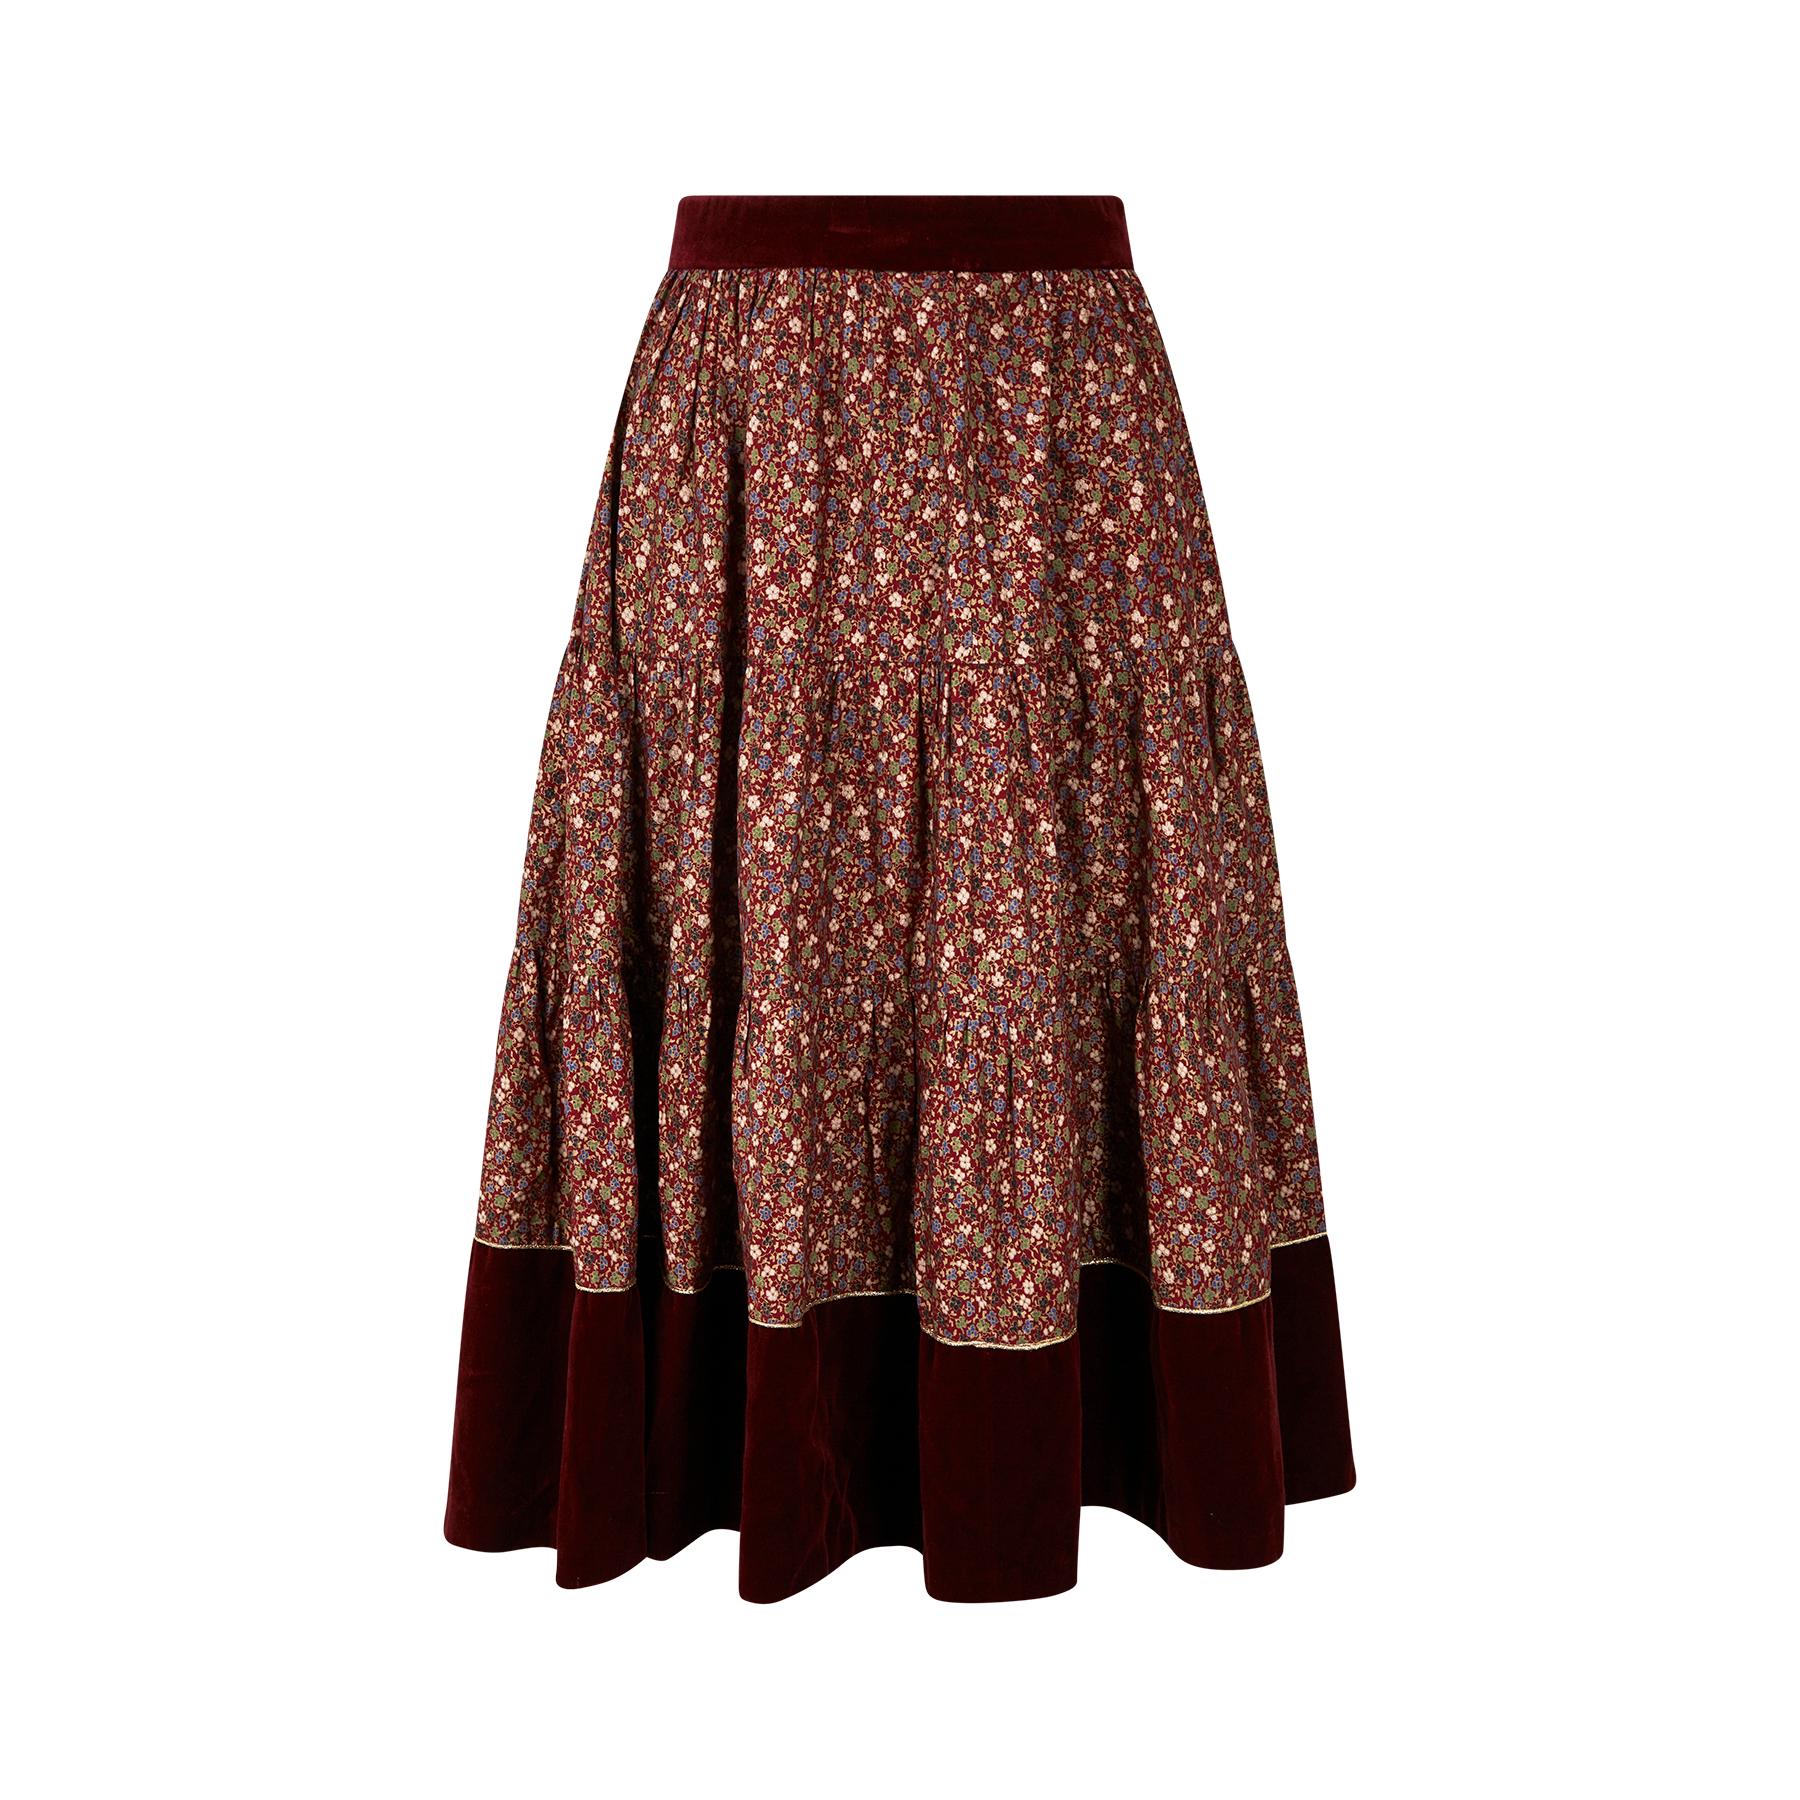 This is the most charming floral printed skirt by British designer Marion Donaldson - a timeless wardrobe staple in a flattering silhouette.  The main fabric is a vibrant printed cotton with a sweet floral motif that resembles forget-me-not flowers